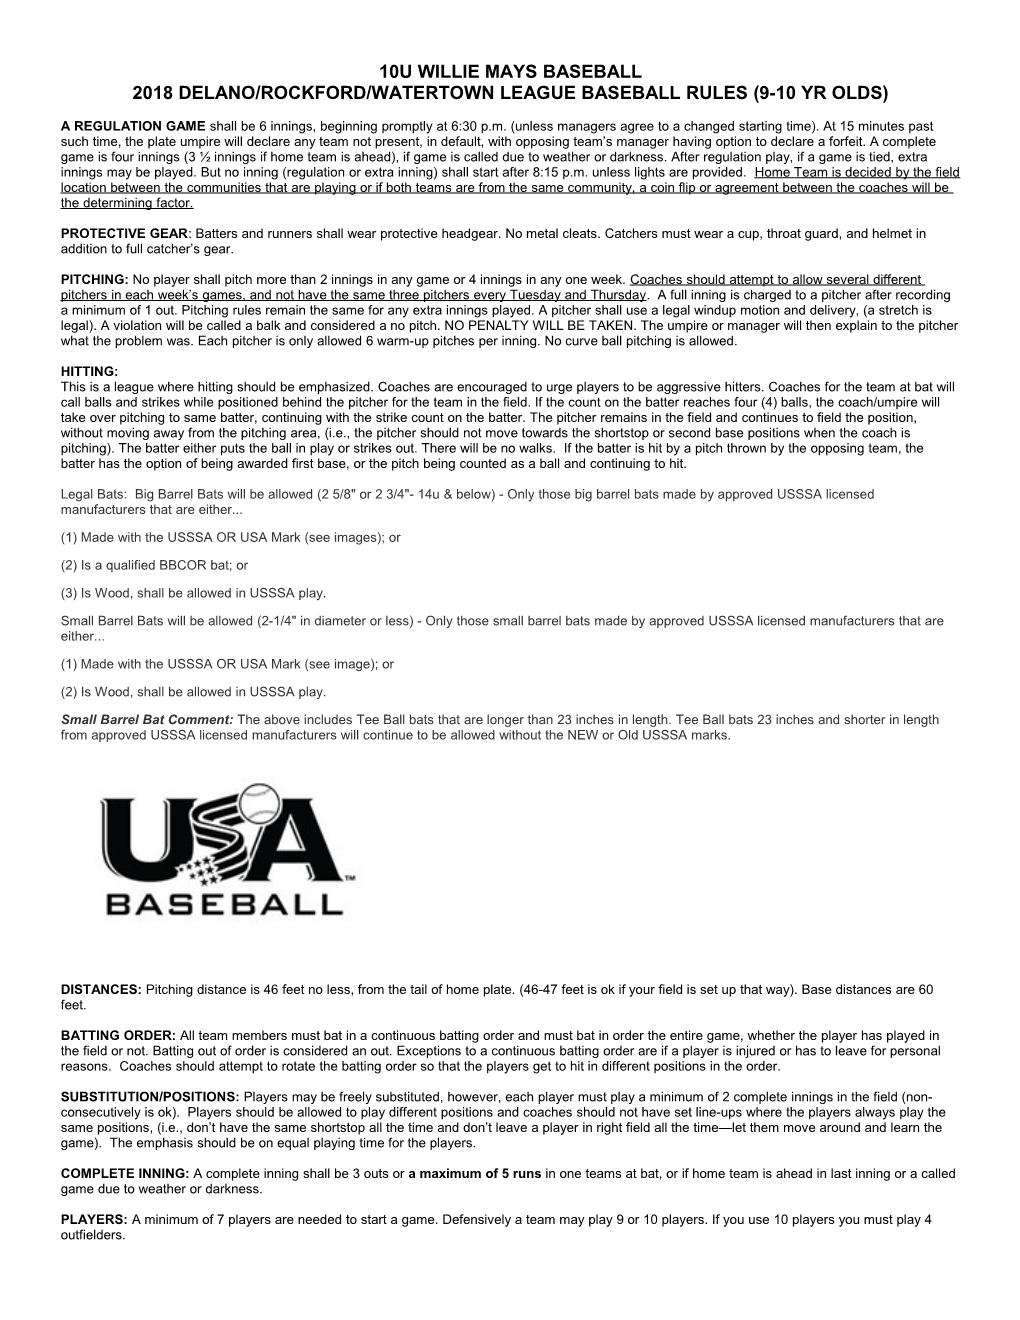 2007 Delano/Loretto/Rockford Willie Mays League Baseball Rules (9-10 Yr Olds)